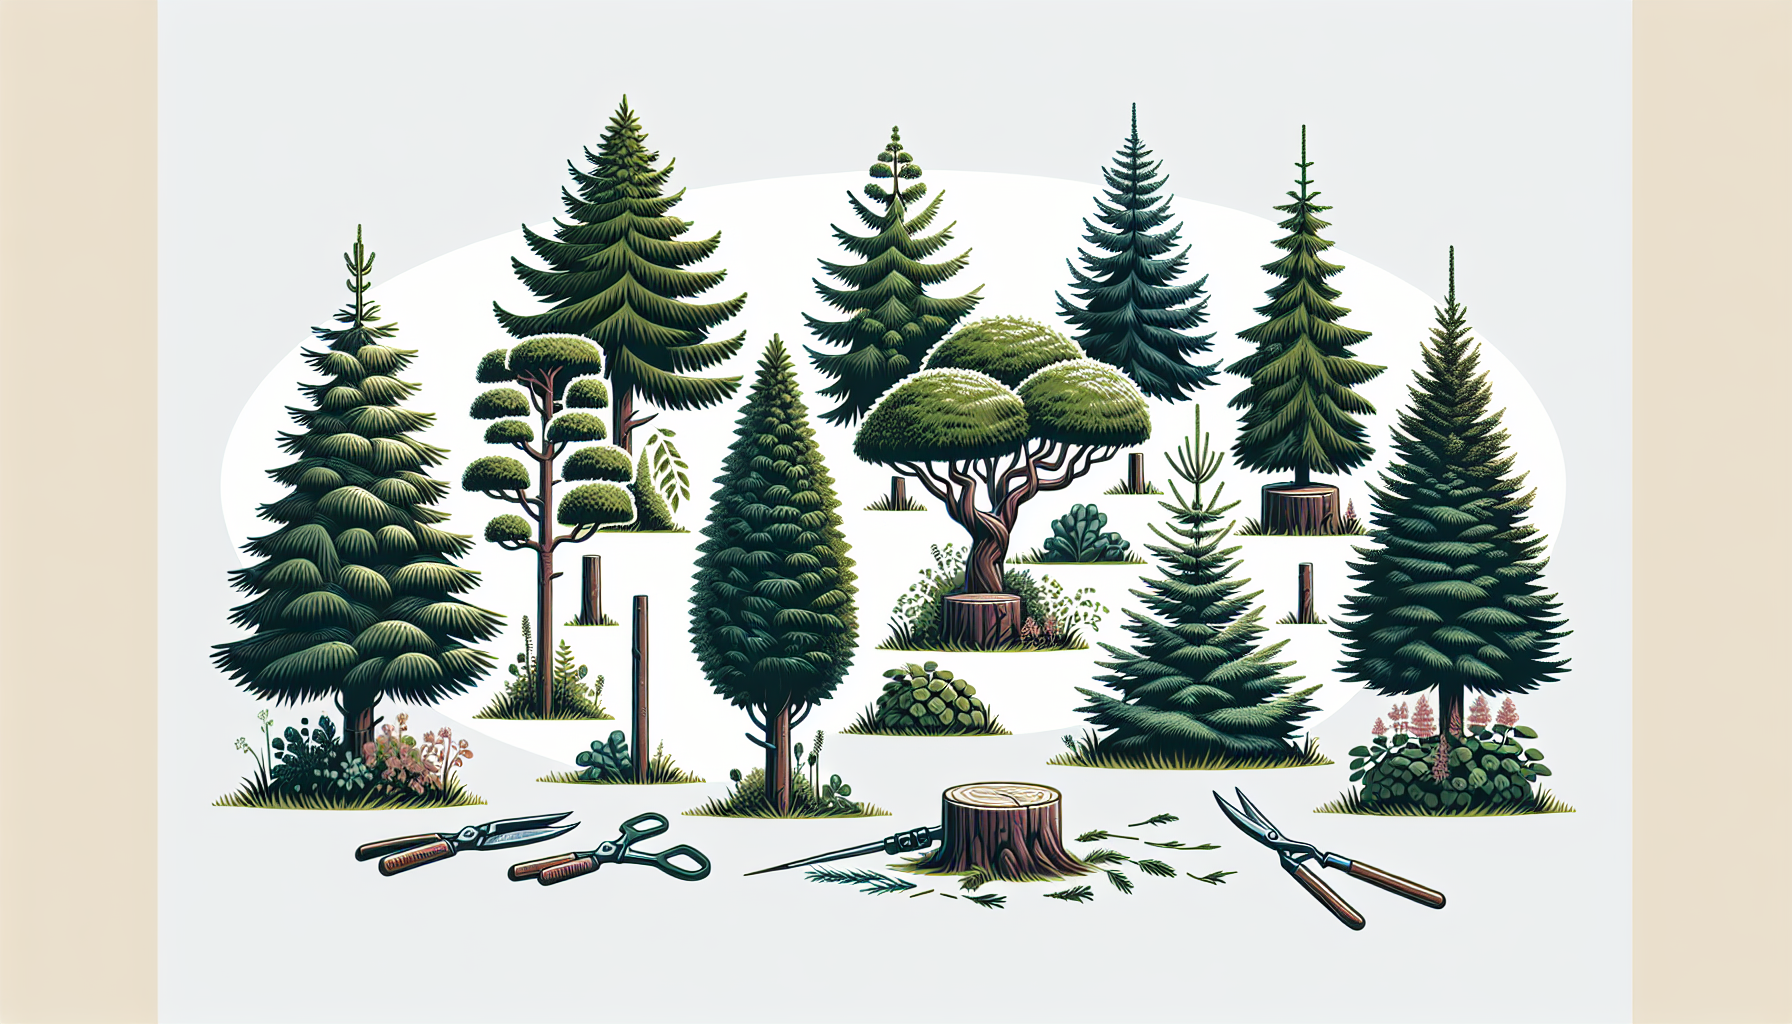 Illustration of pruning techniques for different evergreen tree types